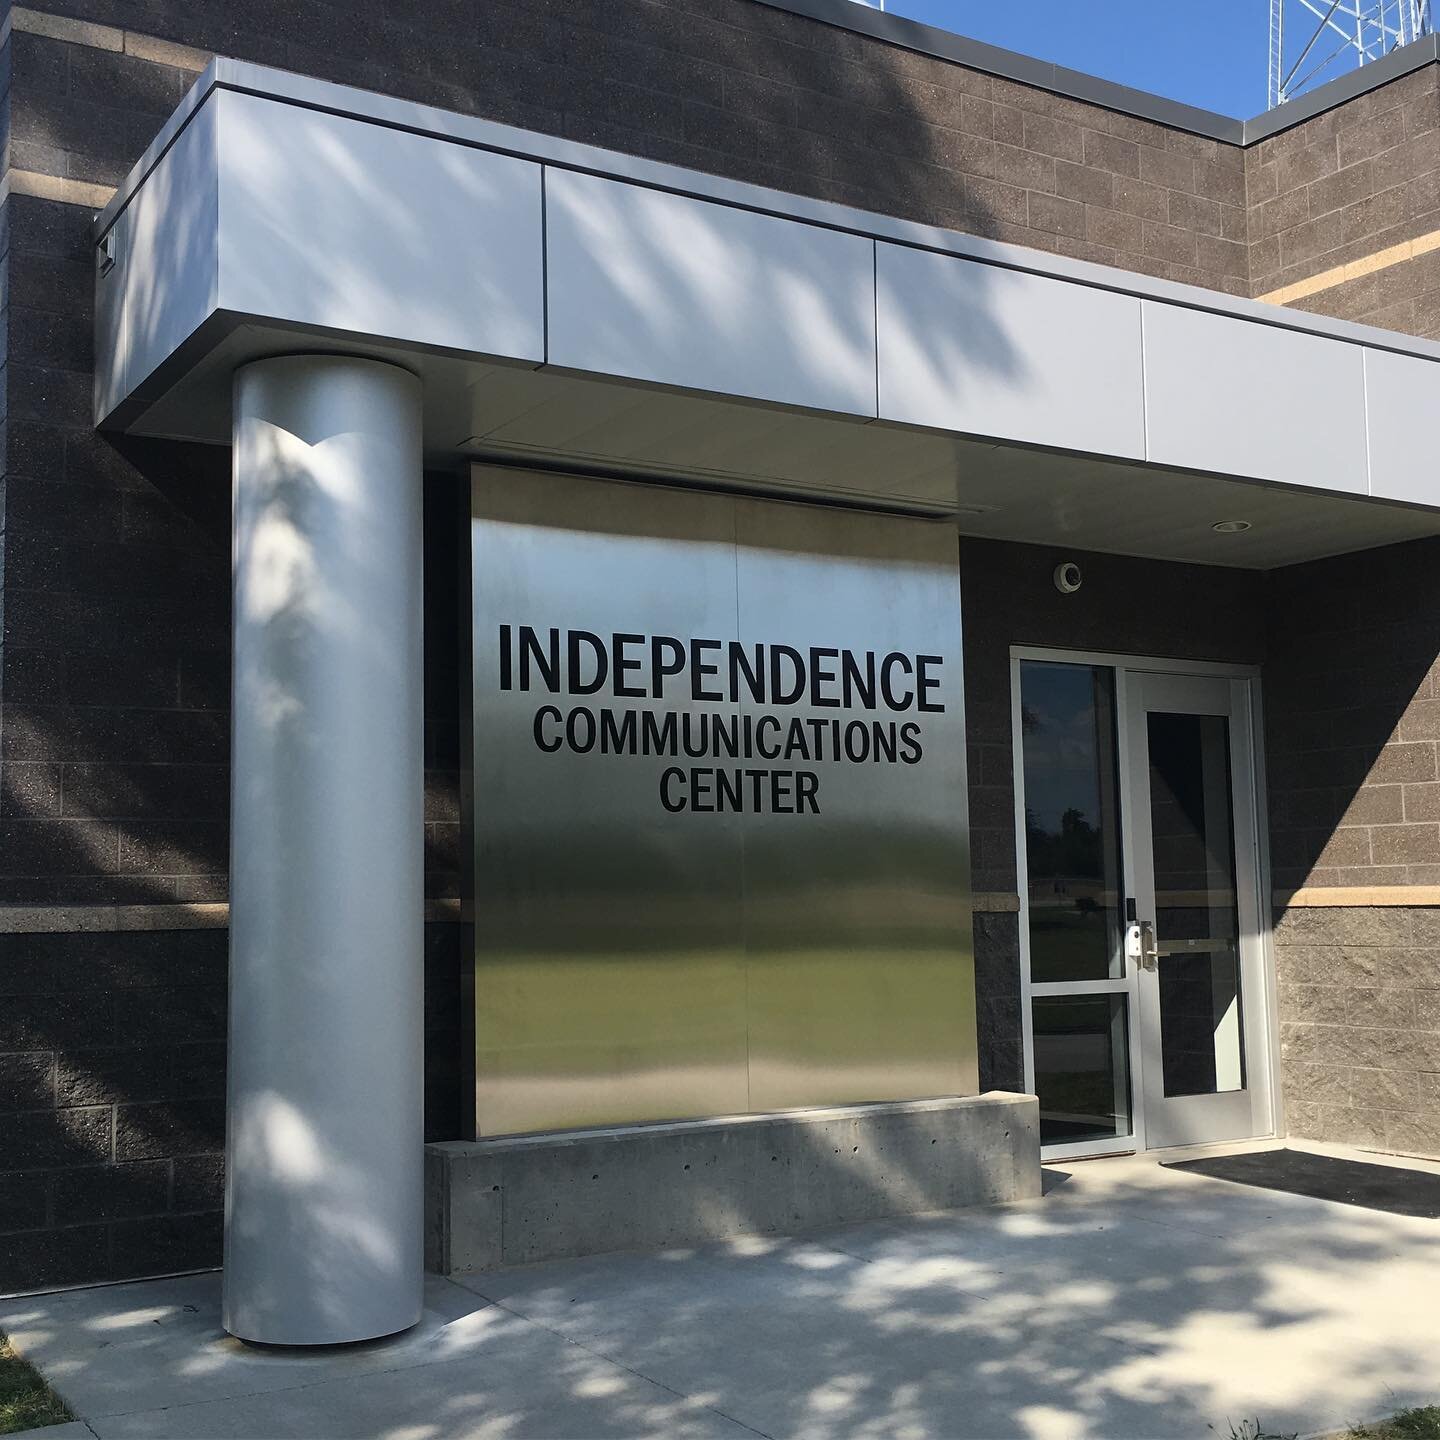 The second sign fabricated and installed for the City of Independence, MO. #metalwork #signs #metalfabrication #metalfab #metalfabricator #stainlesssteel #madeinkc #independencemo